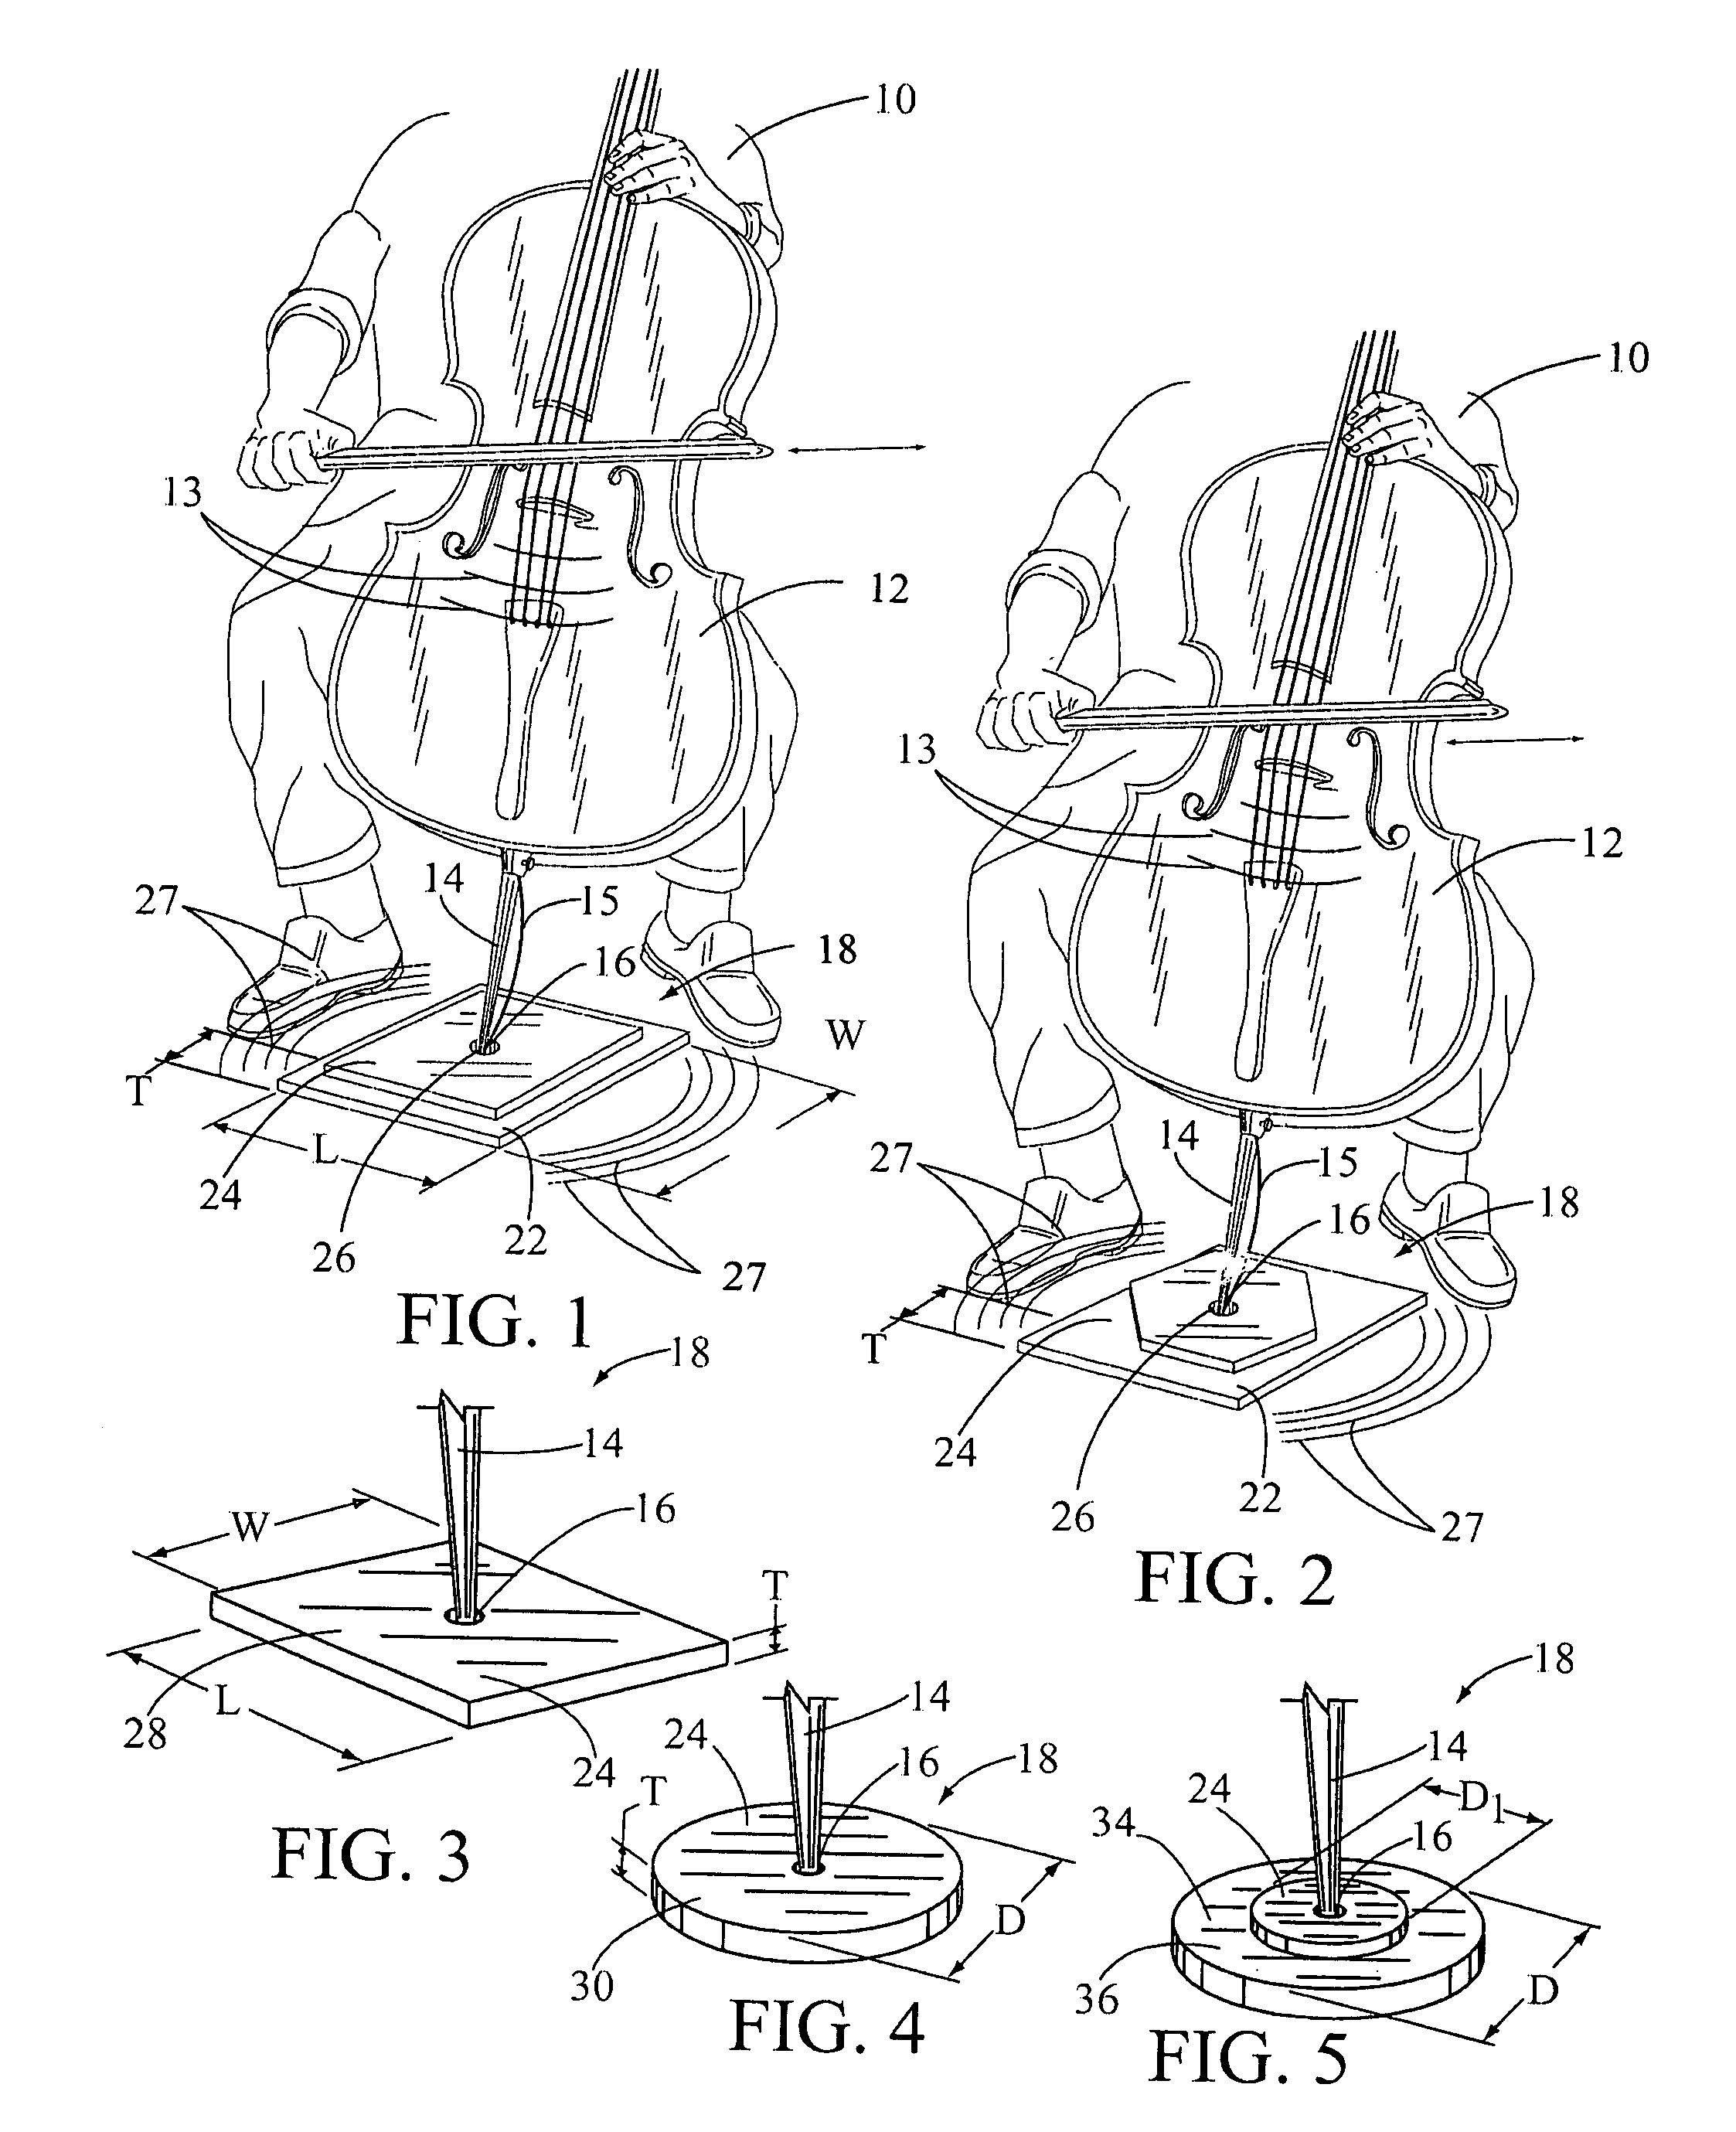 Portable dissipating medium used for removal of vibrational interference in a bowed string of a violin family instrument